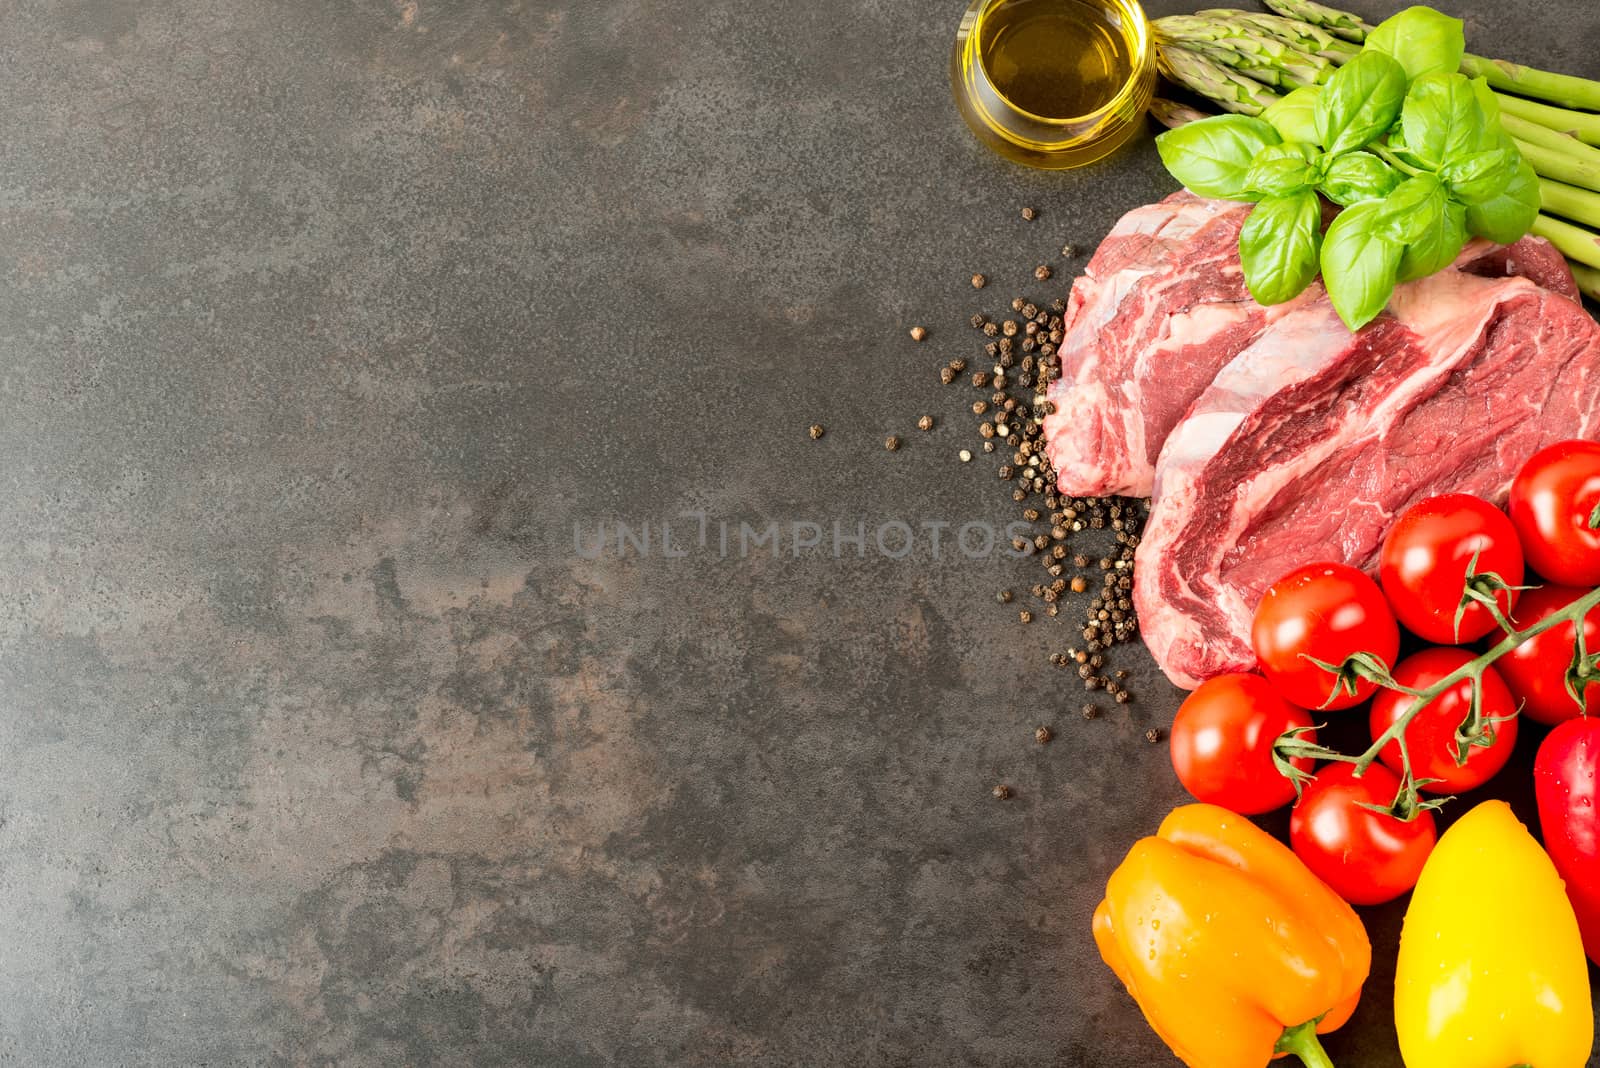 Raw beef steak and vegetables on rustic table with copy space